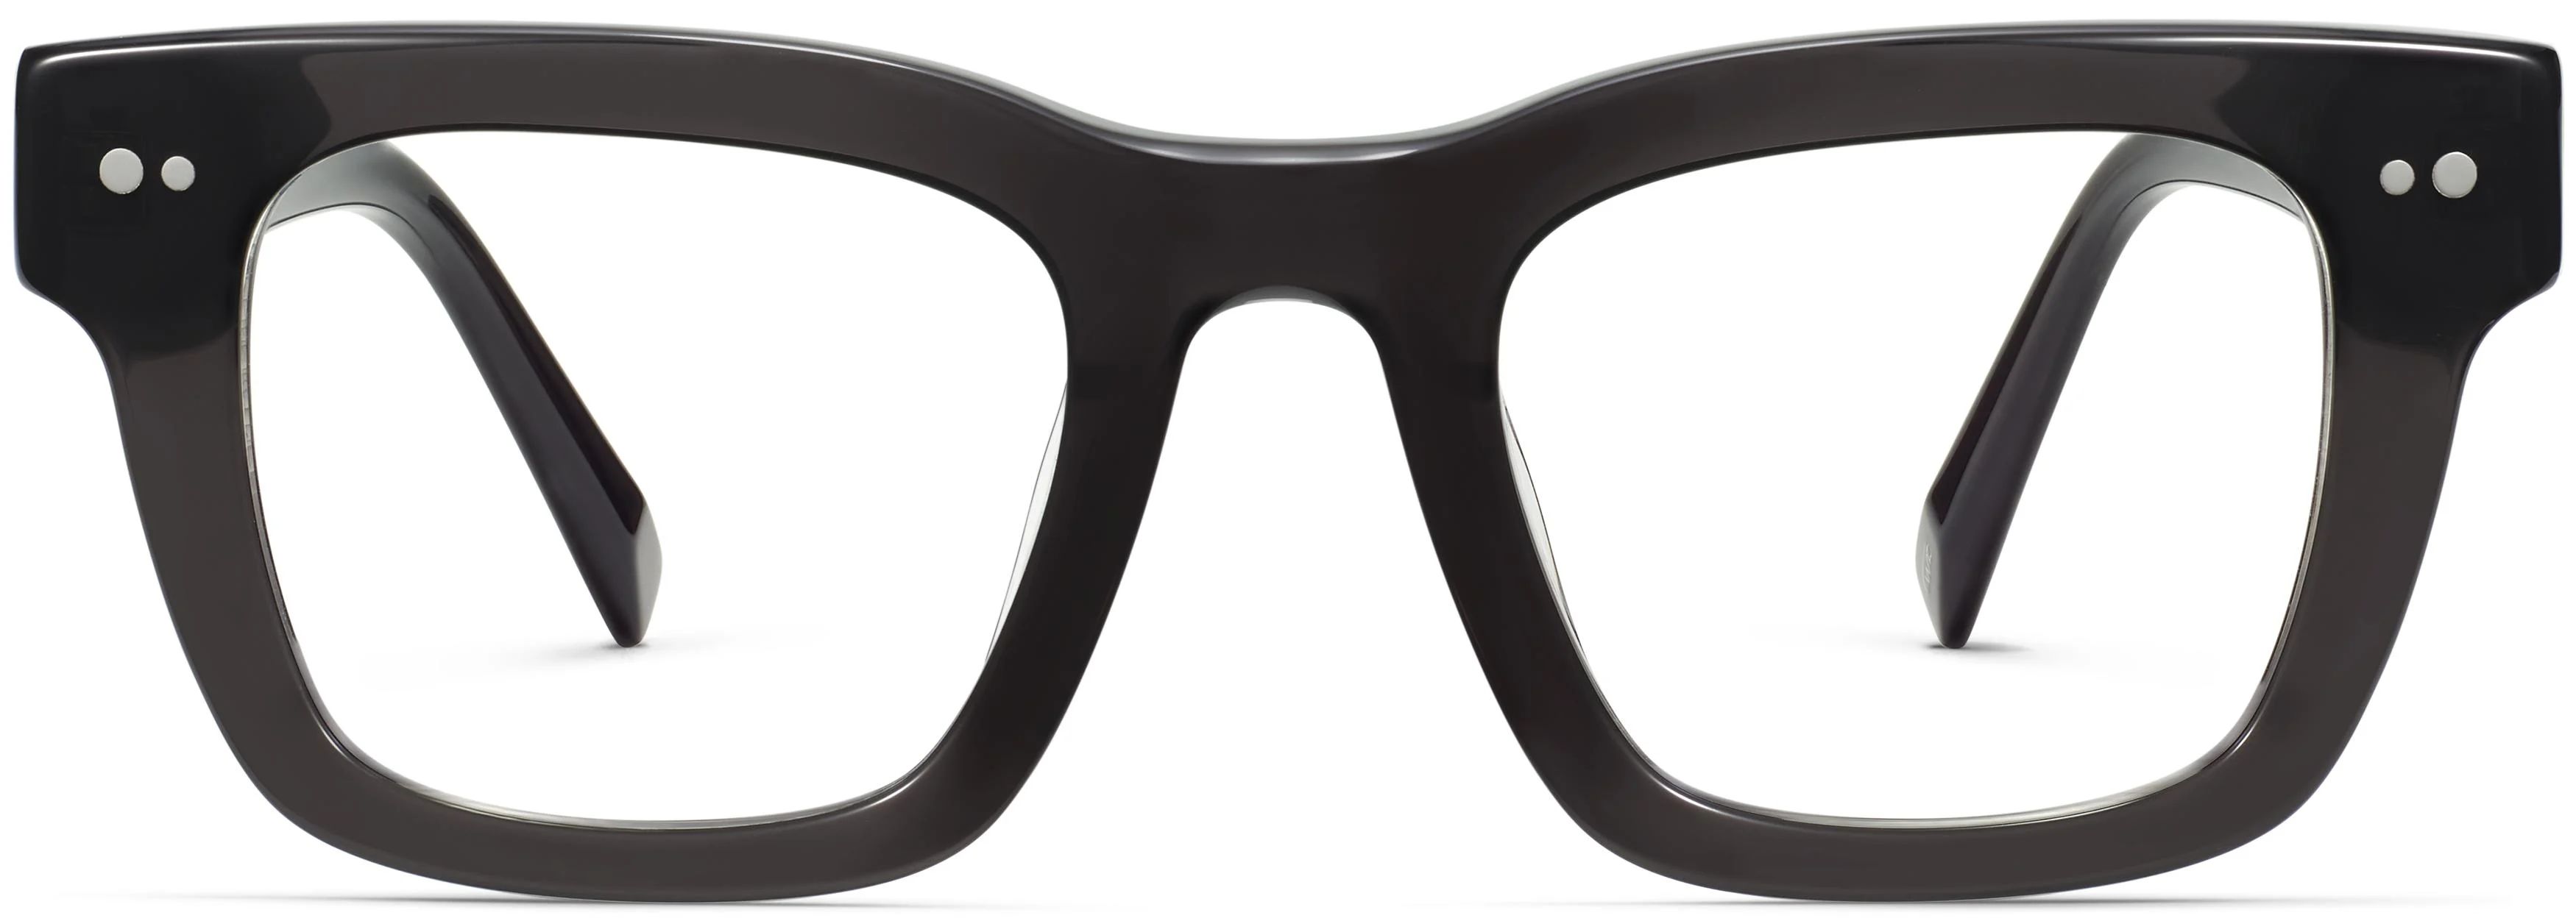 Kemi Eyeglasses in Licorice Crystal | Warby Parker | Warby Parker (US)